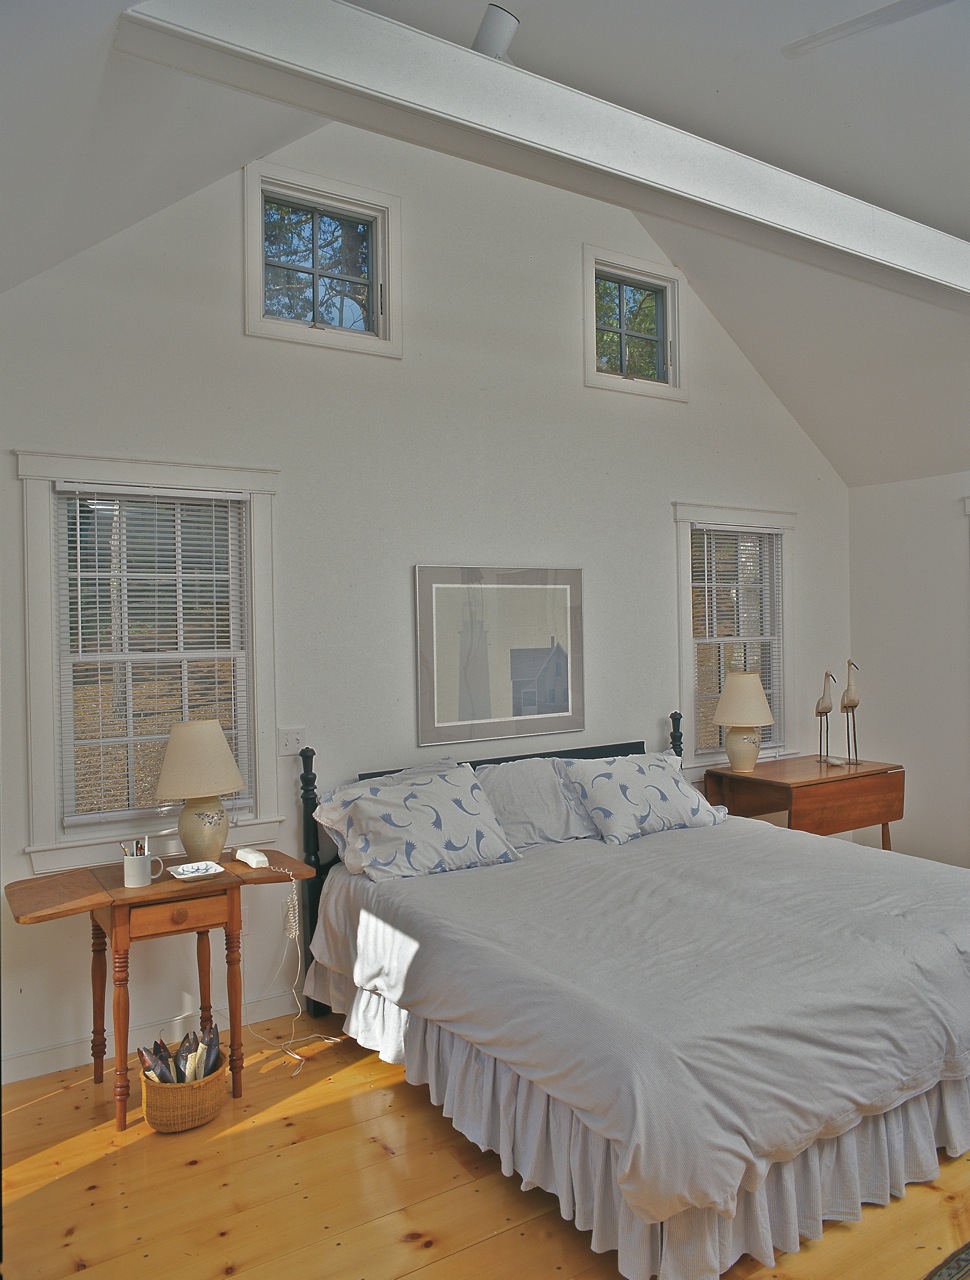 Vaulted ceiling master bedroom, awning windows at gable end, traditional Cape Cod house plan